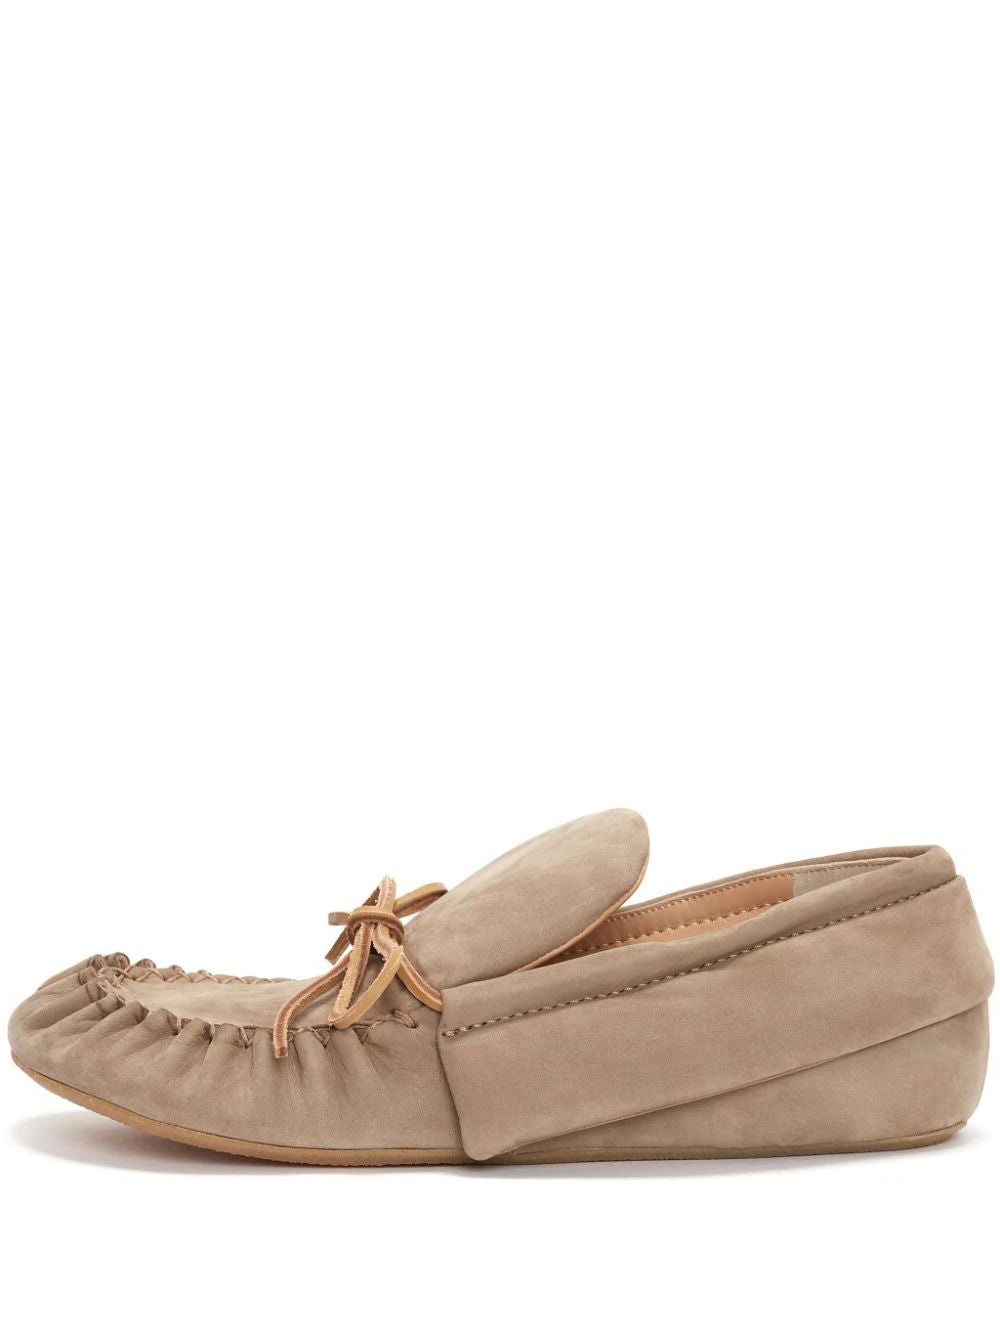 JW ANDERSON-LOAFER FLAT-ANW42212A 19513